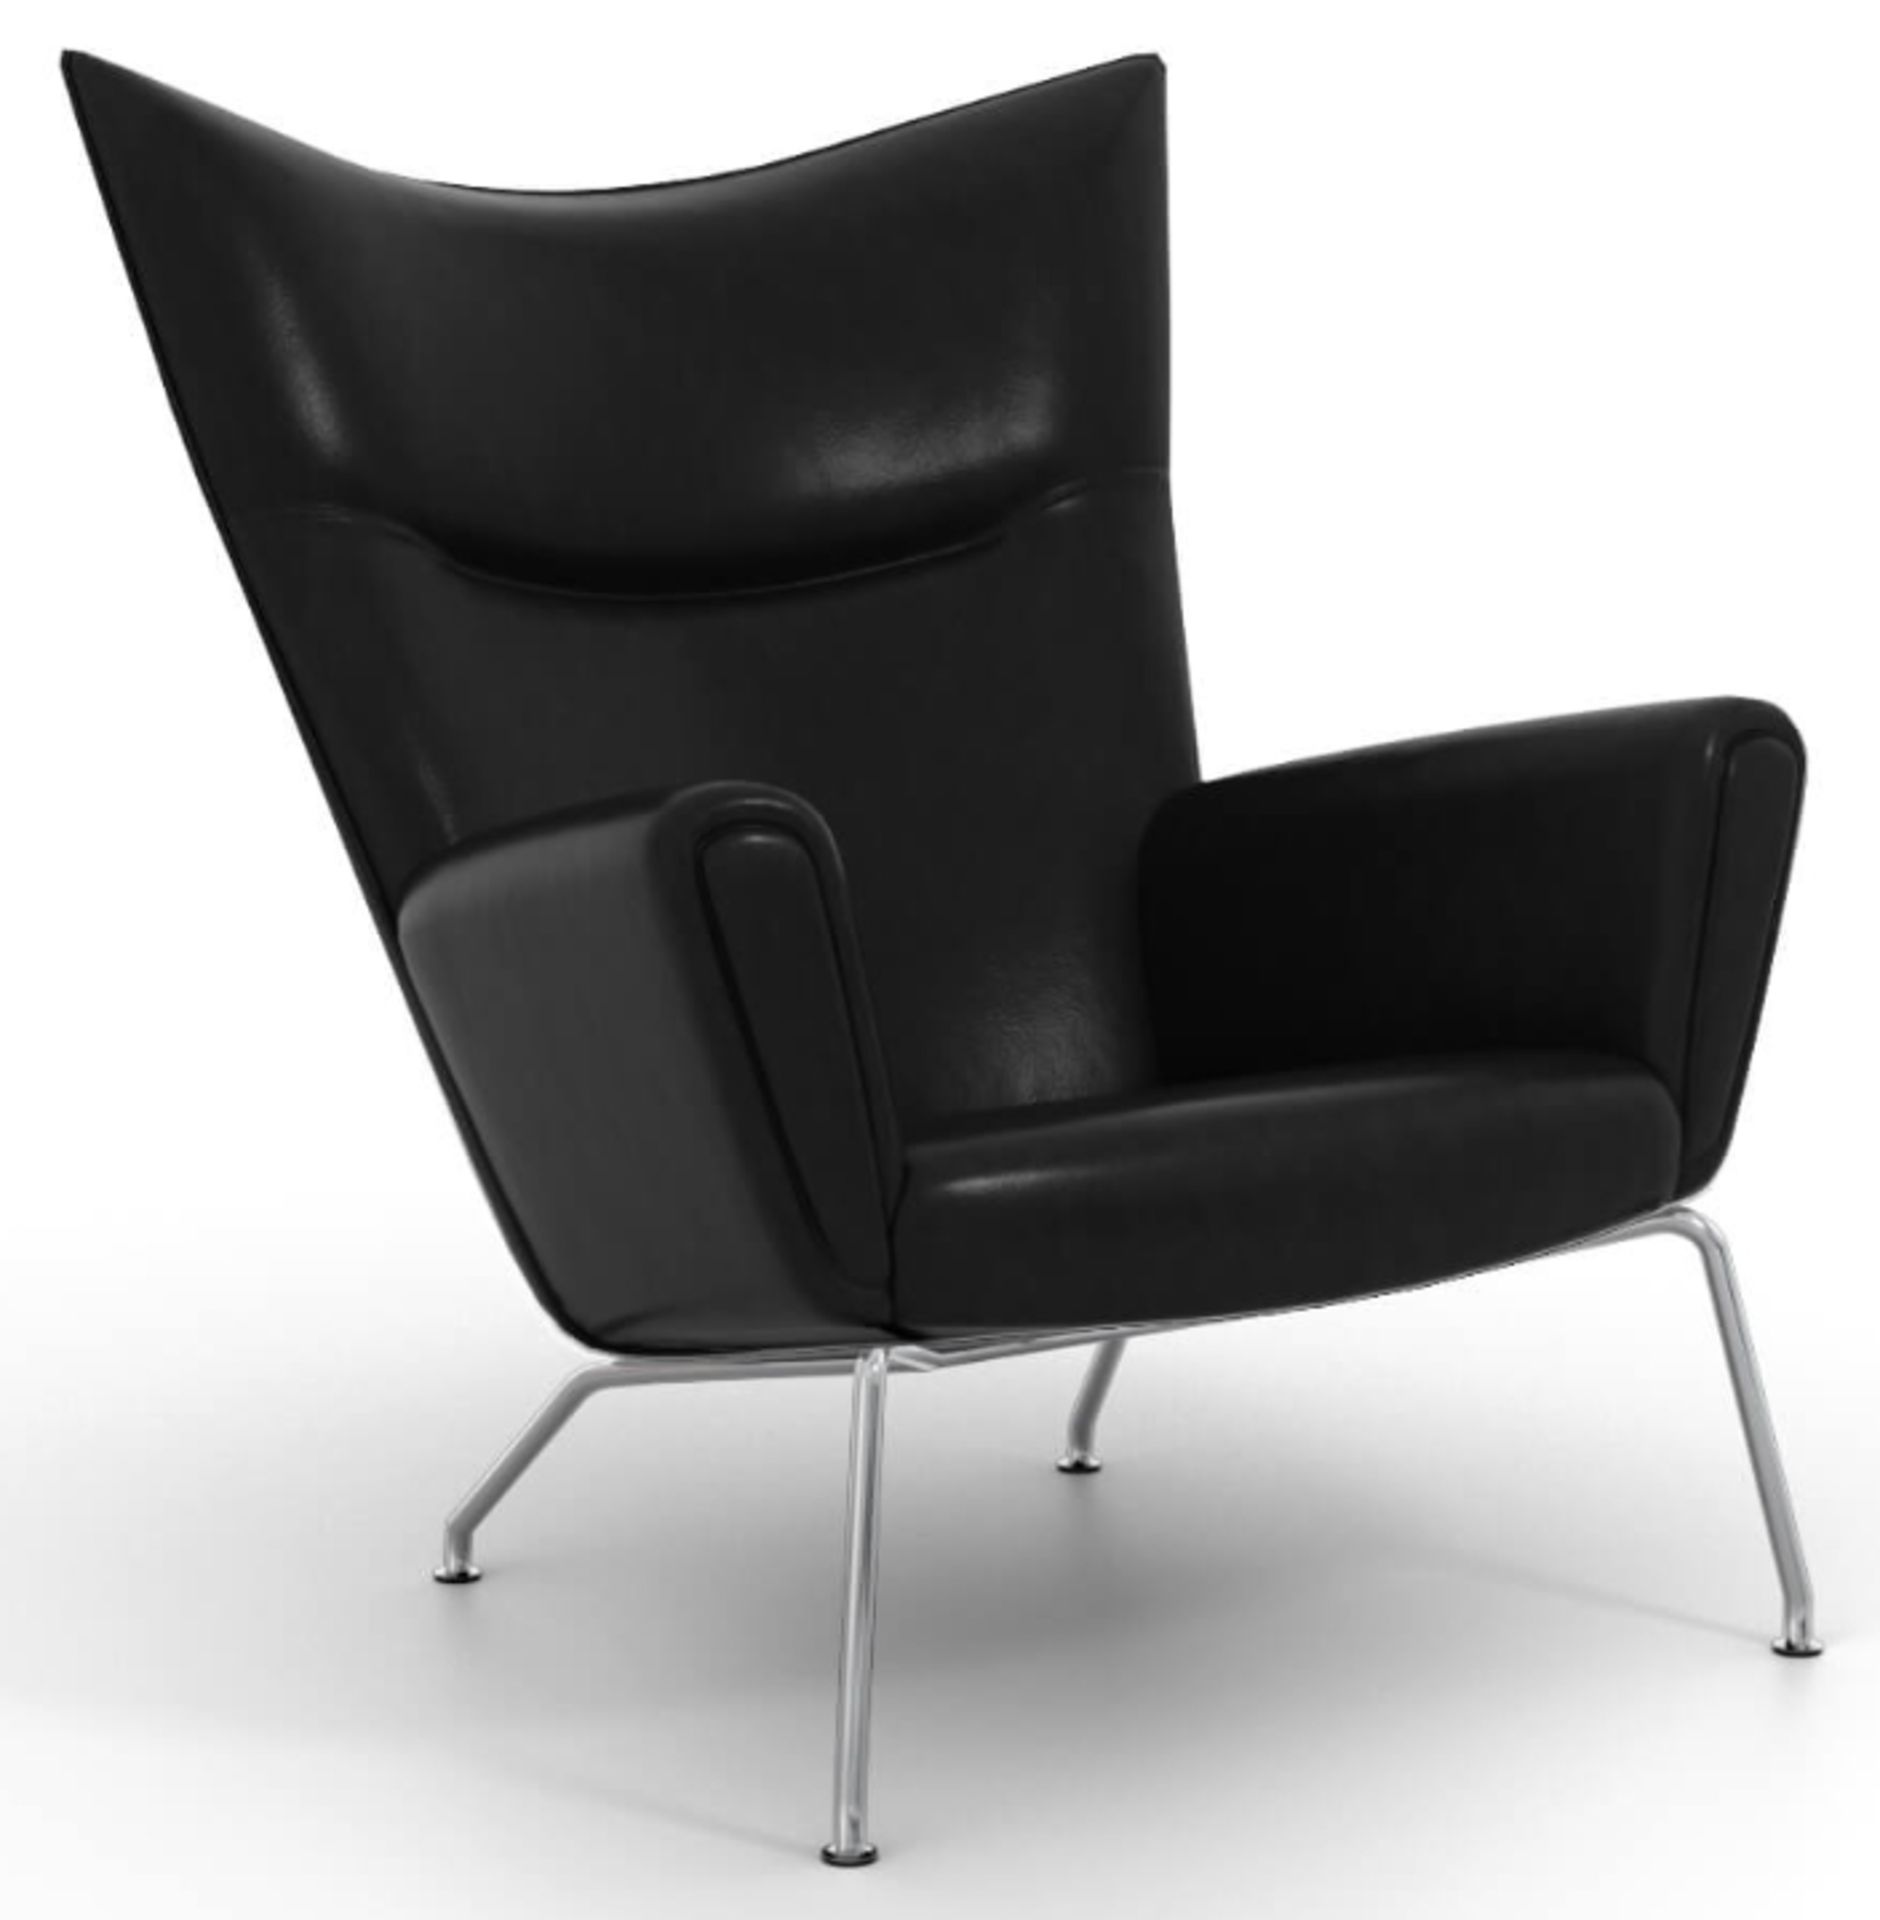 1 x Hans Wegner Inspired Wing Arm Chair - Genuine Black Leather Upholstery - Image 10 of 11